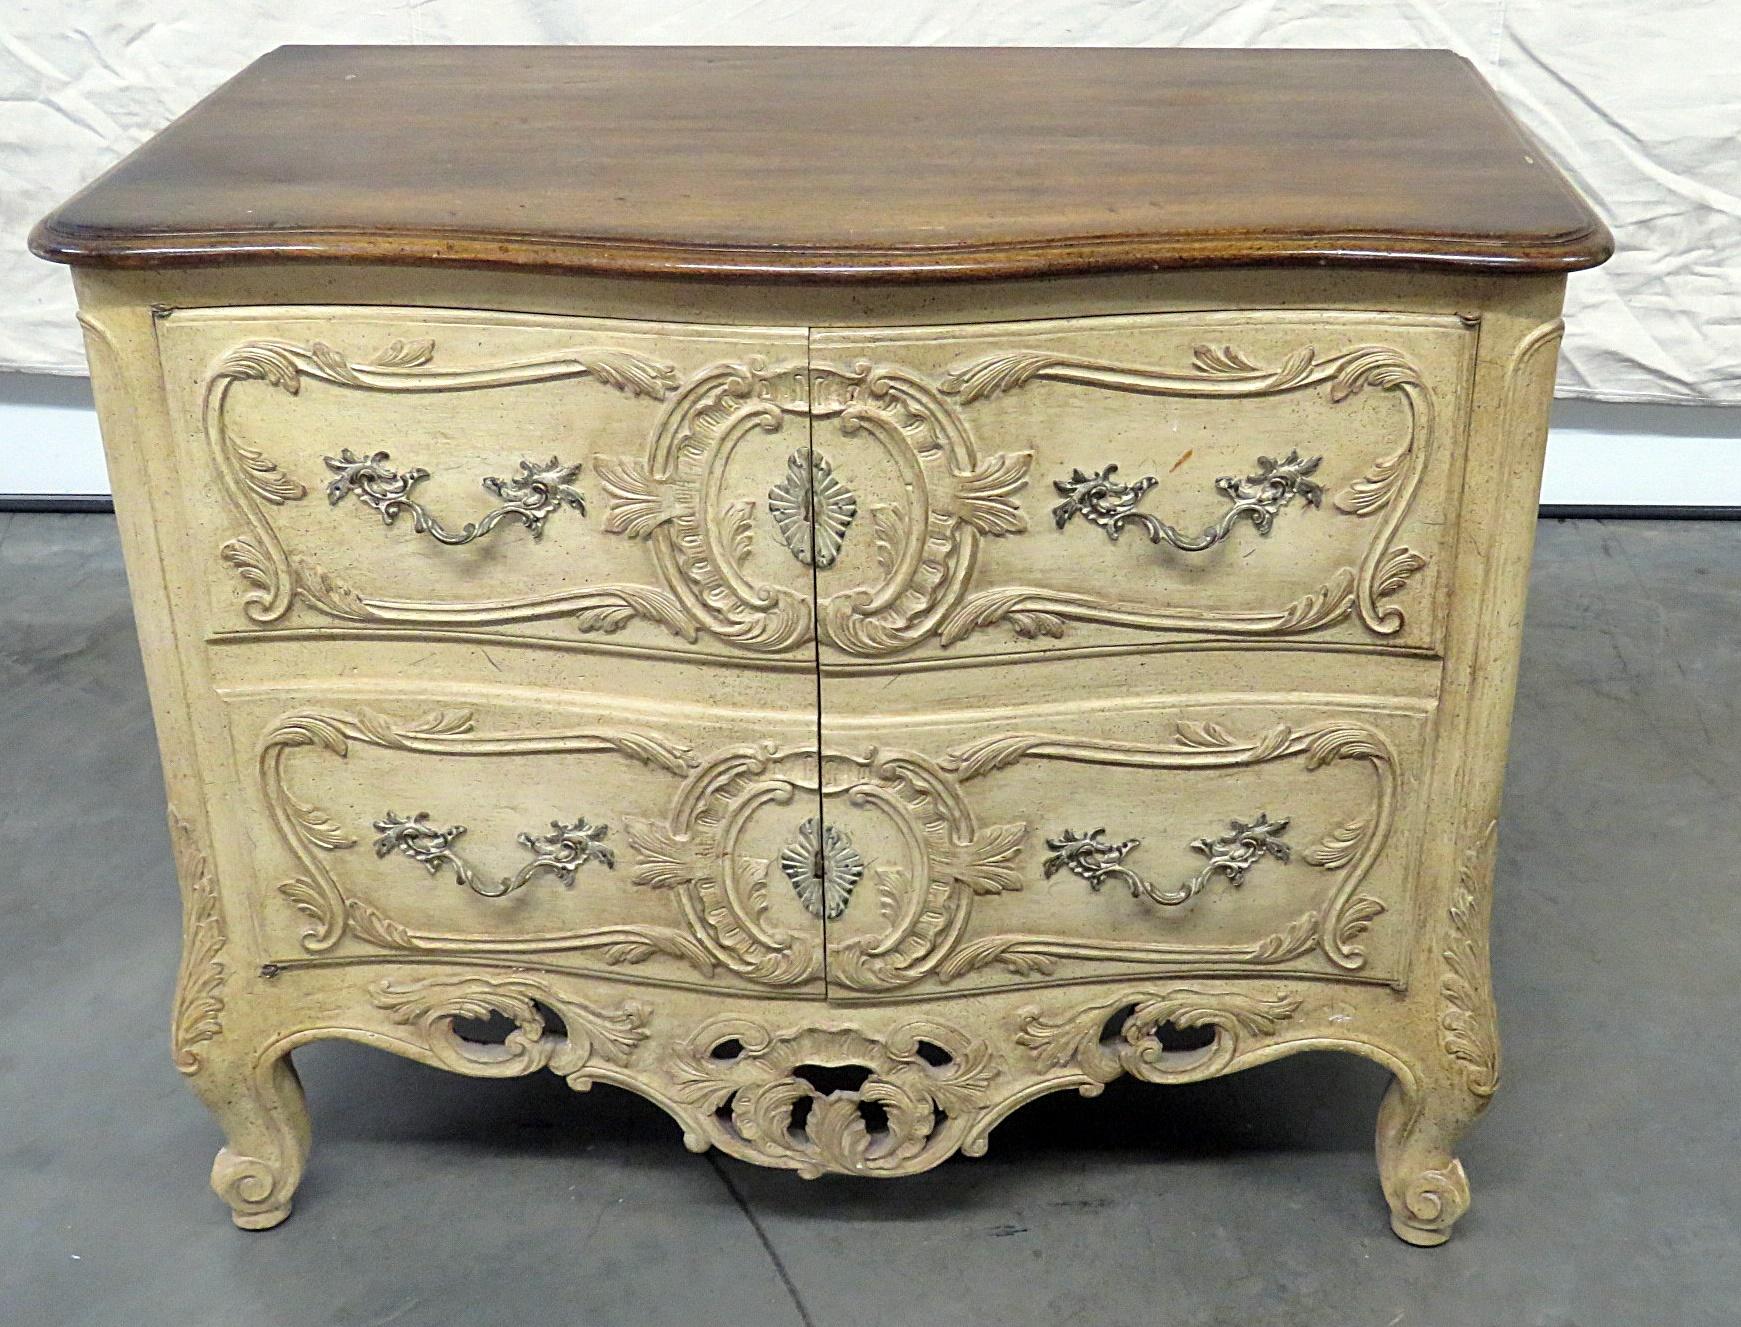 Don Rousseau style distressed painted commode with 2 doors containing 2 shelves.